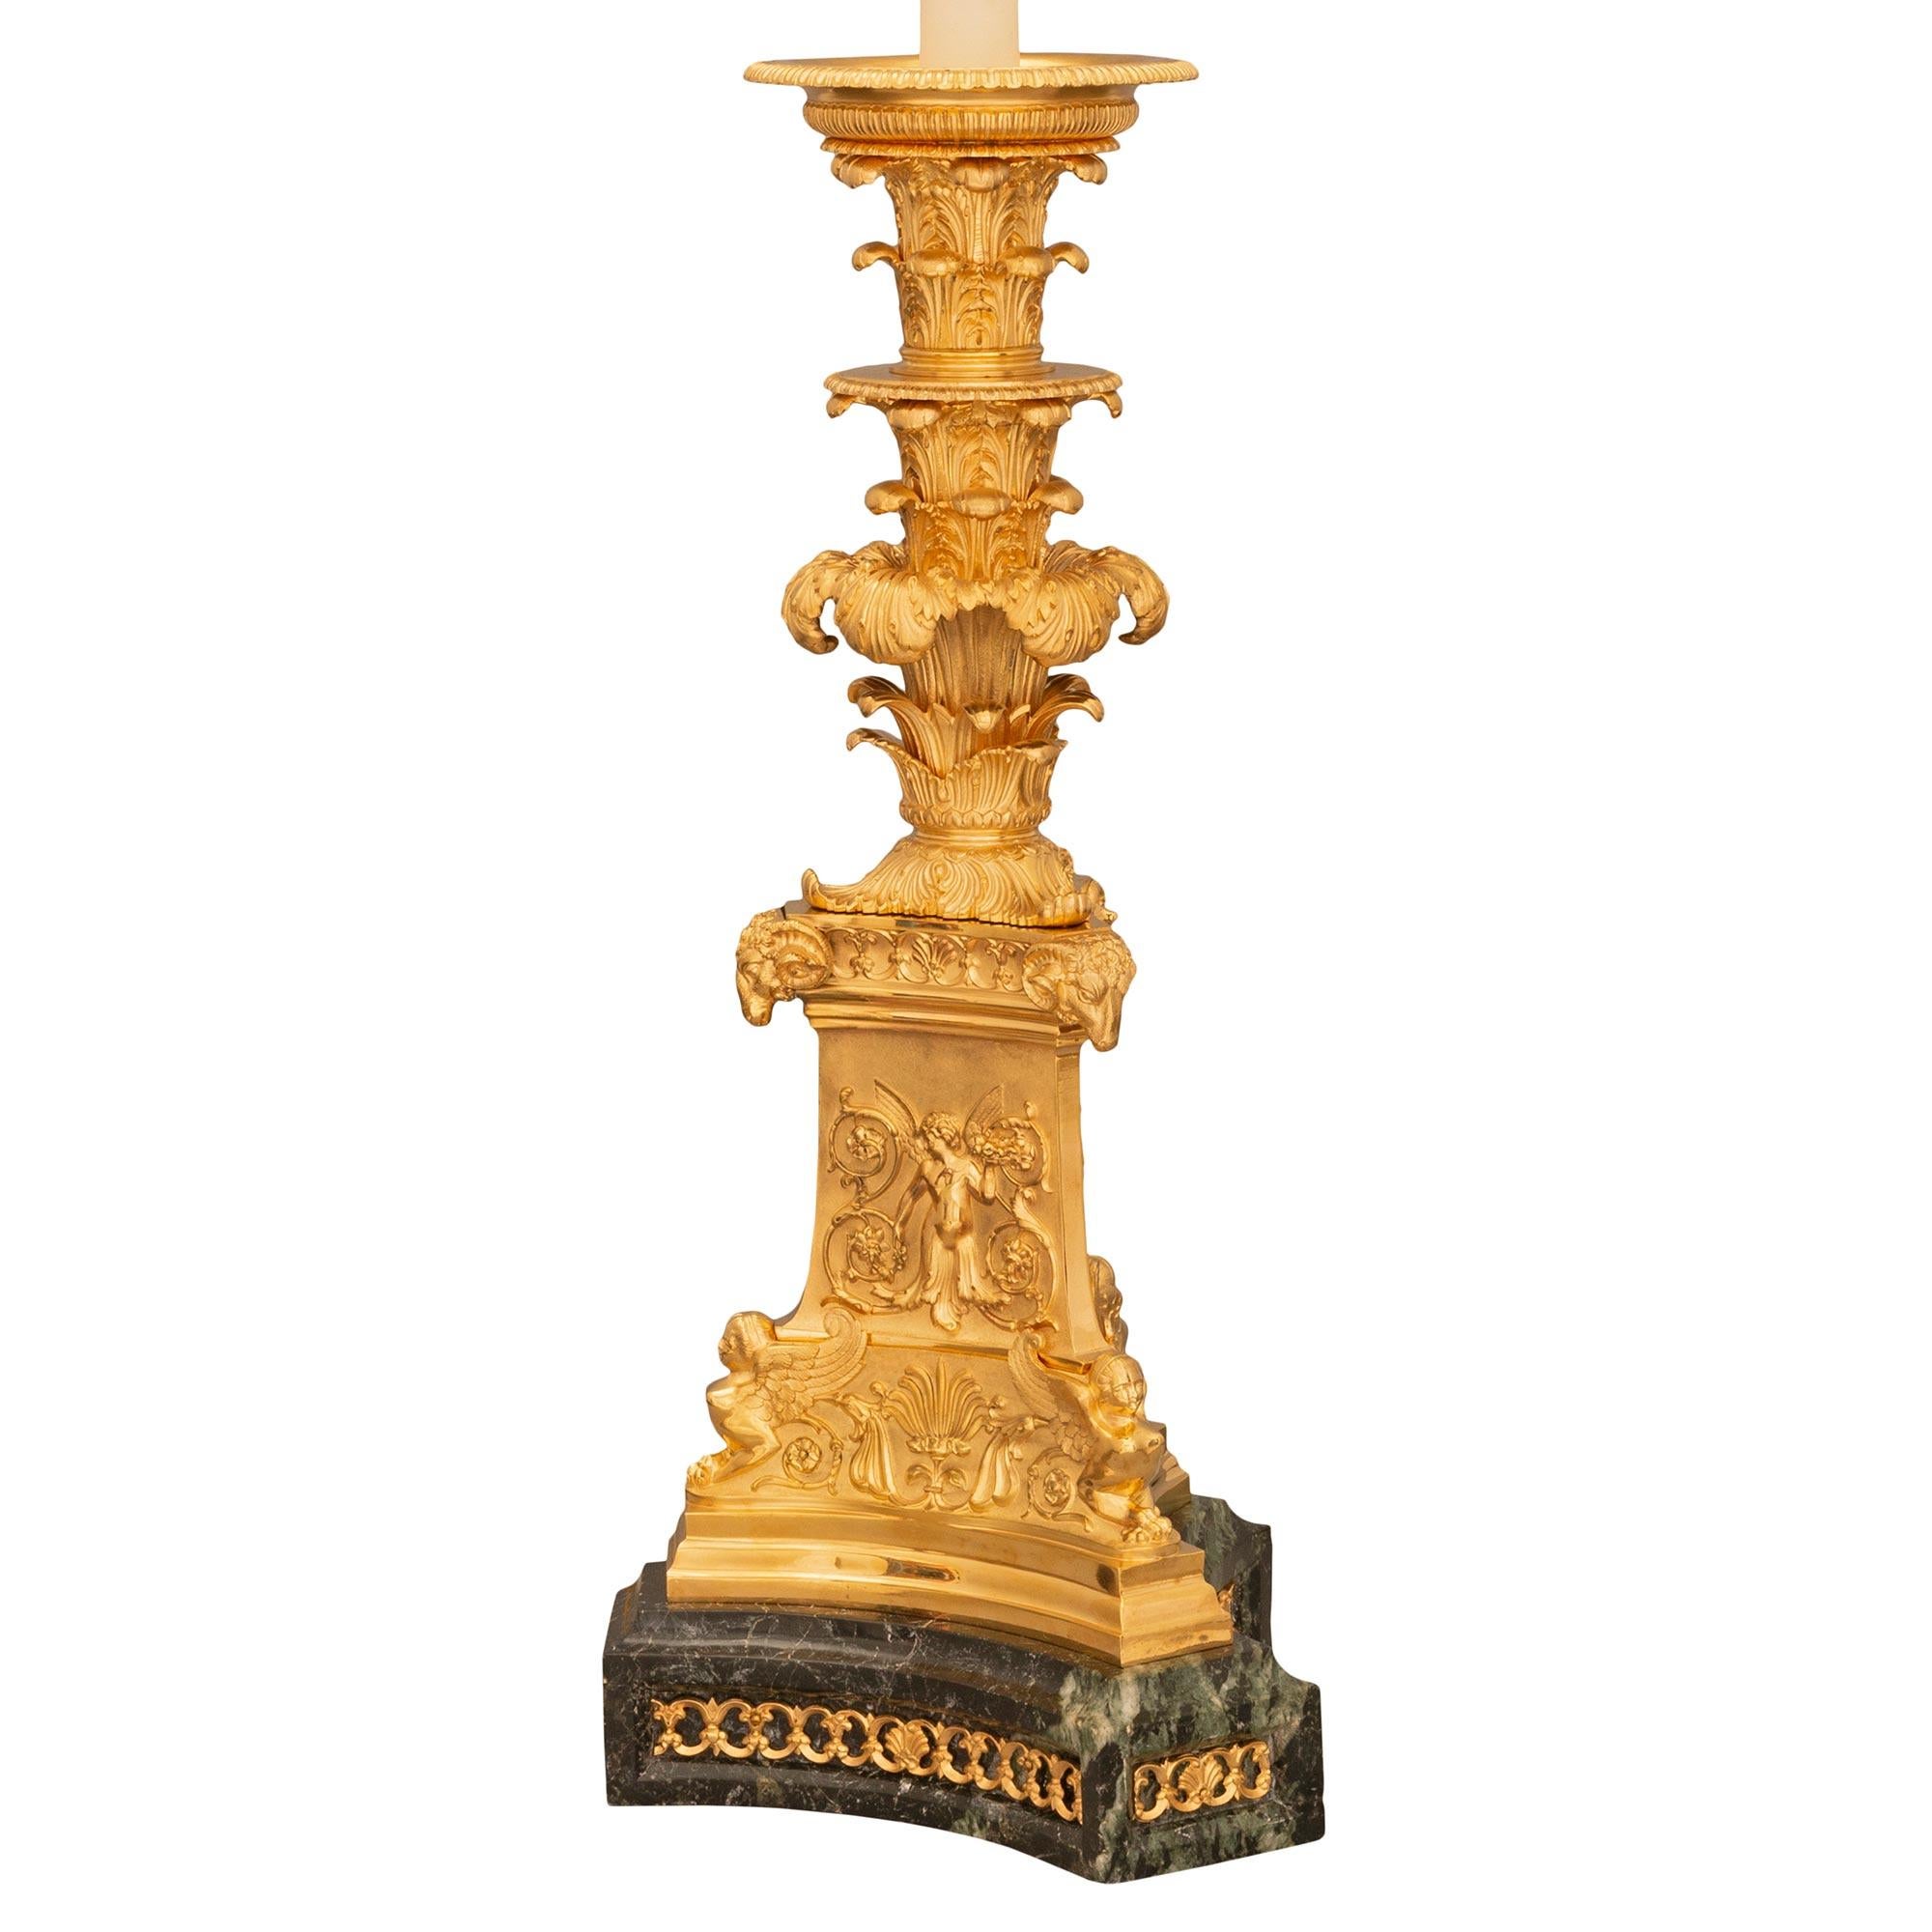 French 19th Century Empire St. Belle Époque Period Marble and Ormolu Lamp In Good Condition For Sale In West Palm Beach, FL